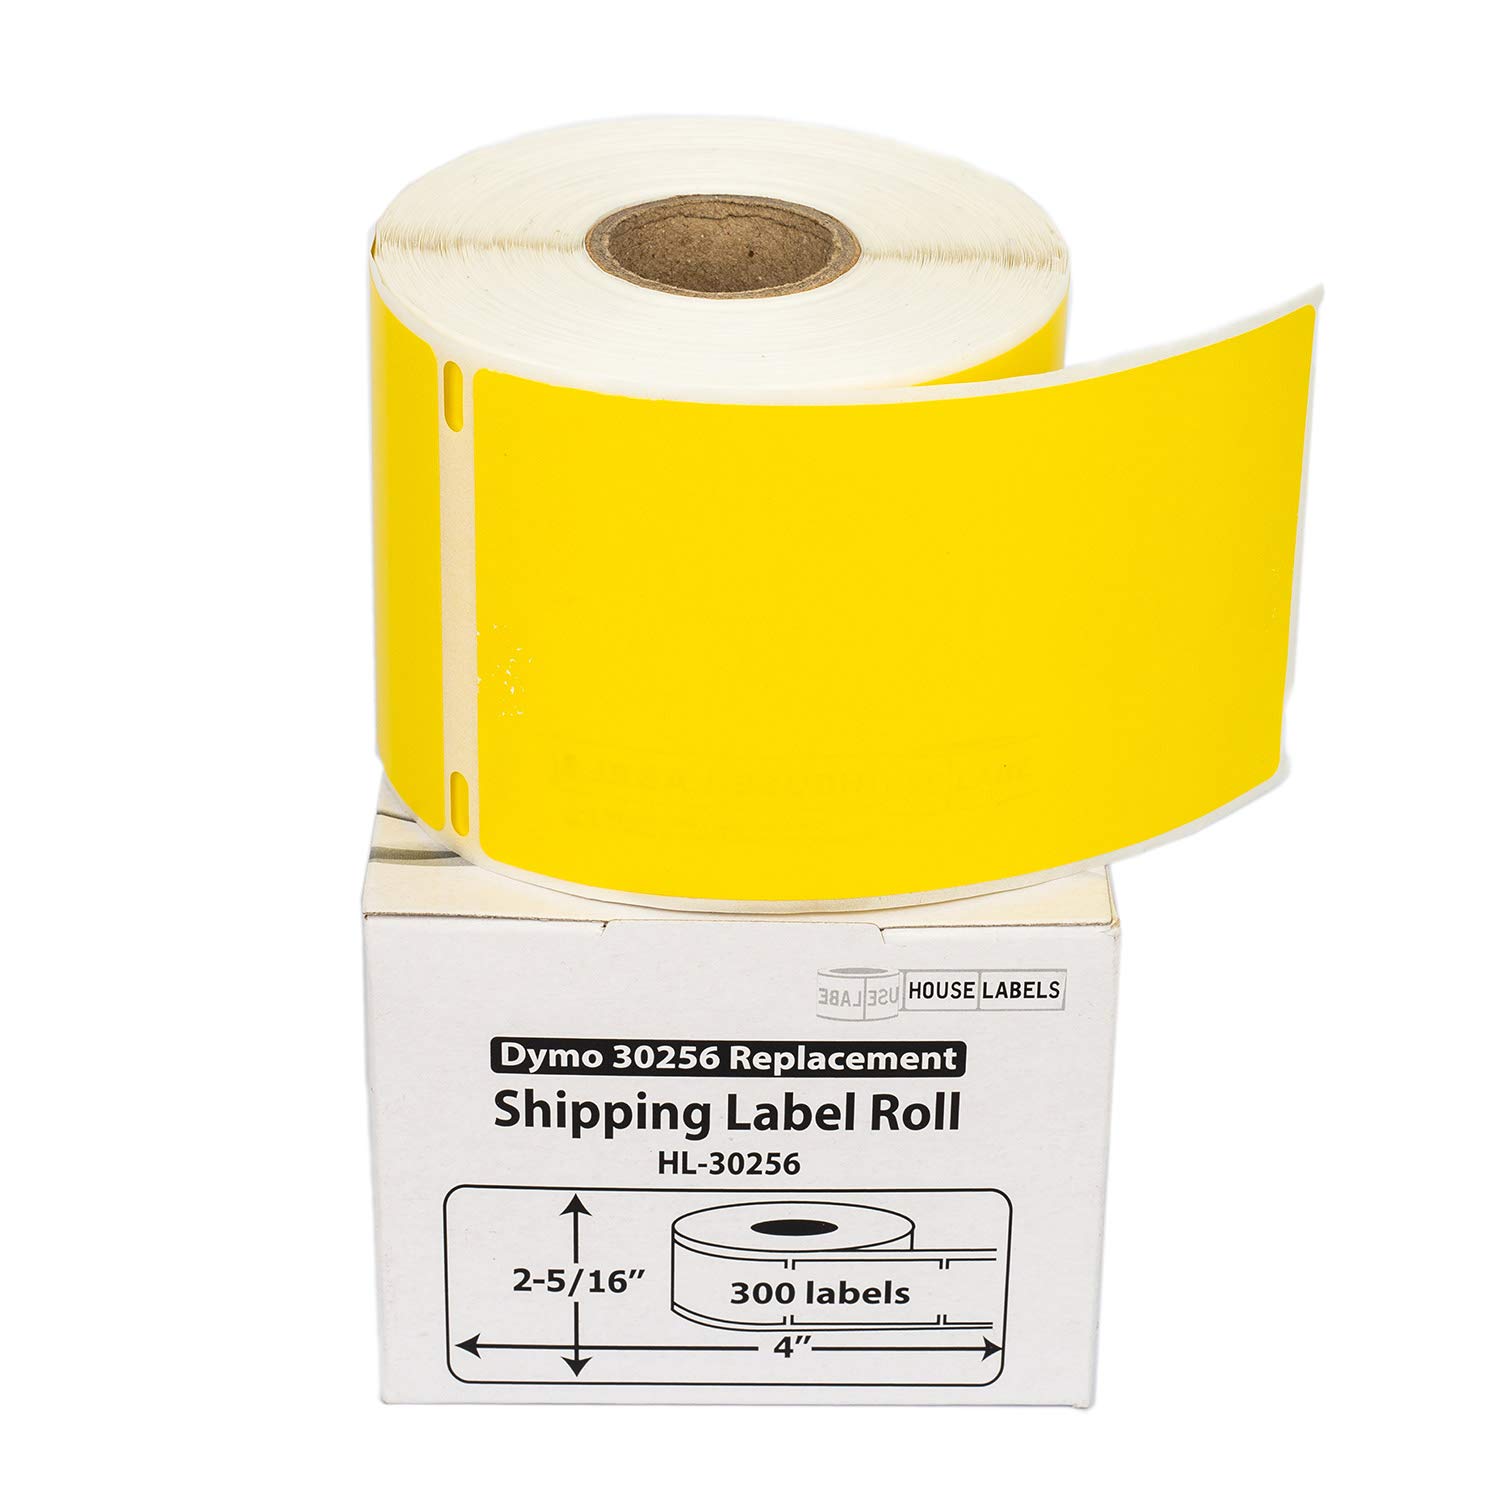 HOUSELABELS Compatible DYMO 30256 Yellow Shipping Labels (2-5/16" x 4") Compatible with Rollo, DYMO LW Printers, 50 Rolls / 300 Labels per ...